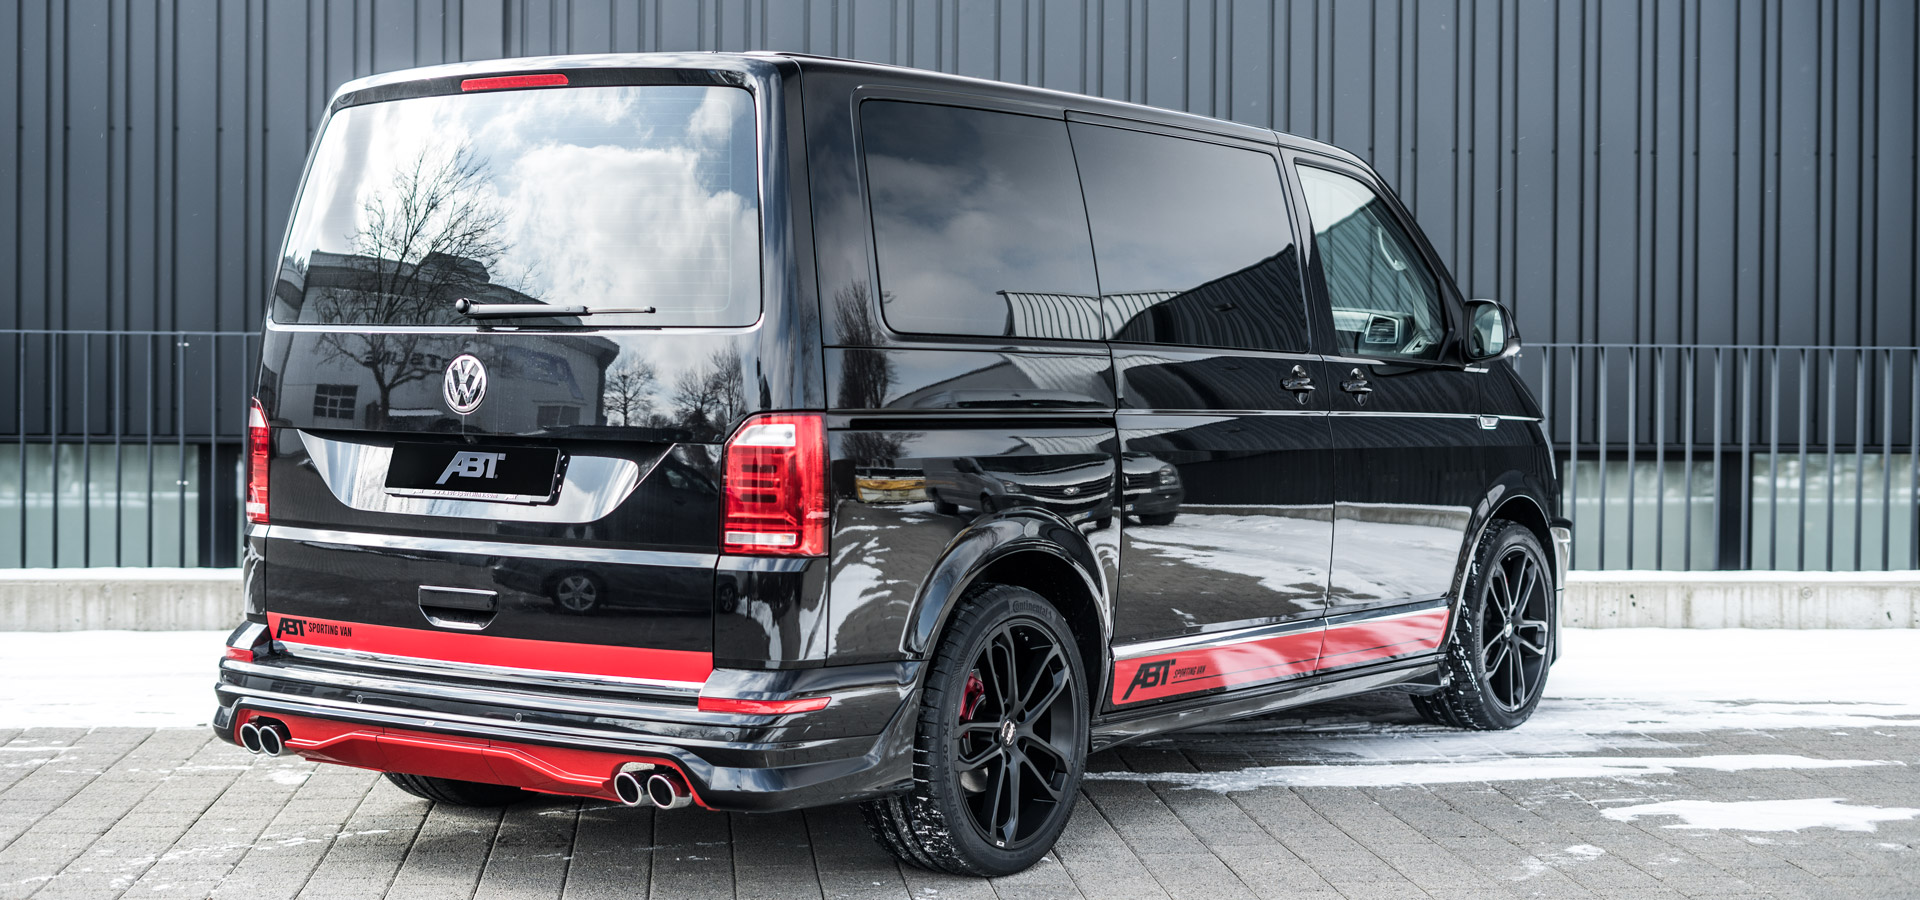 Powerful Bus system – the ABT T5 with up to 200 diesel hp - Audi Tuning, VW  Tuning, Chiptuning von ABT Sportsline.